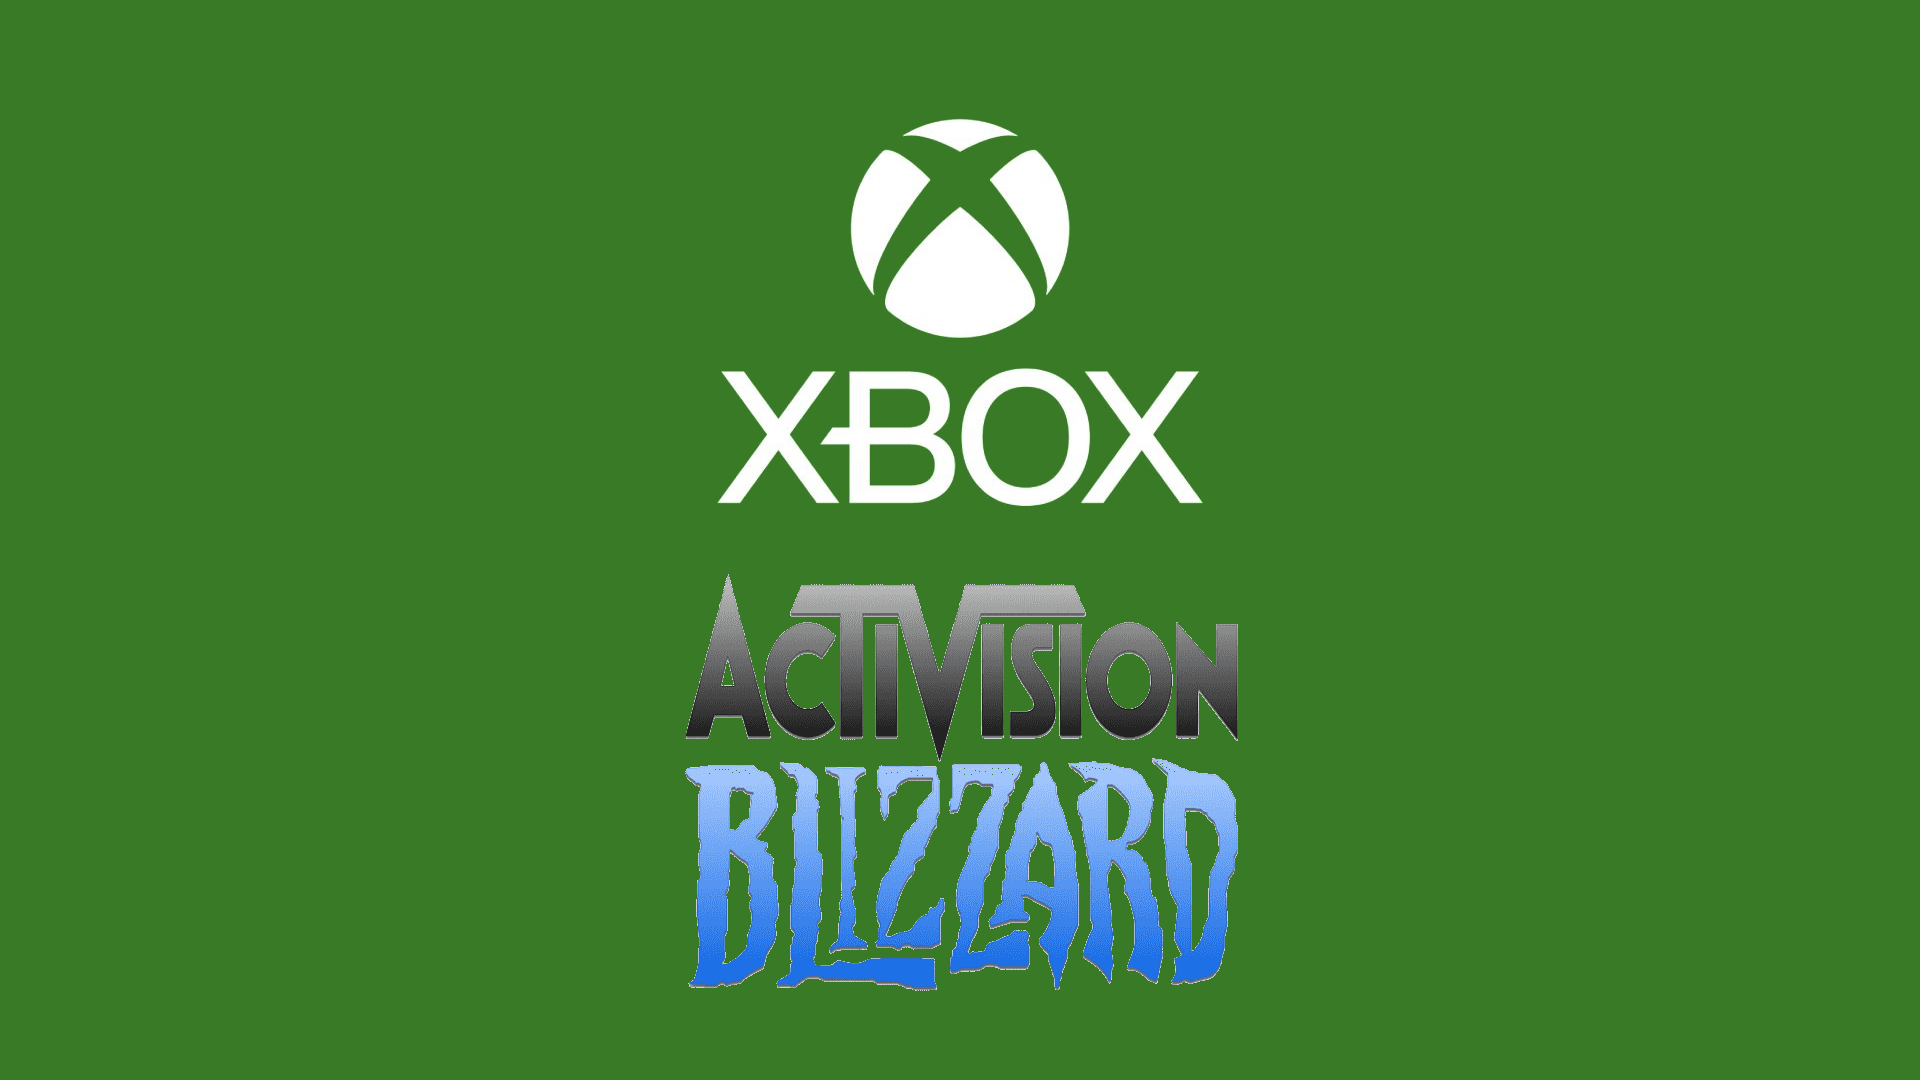 Microsoft To Sell Activision Blizzard Cloud Gaming Rights To Ubisoft To Facilitate UK Approval Of Merger